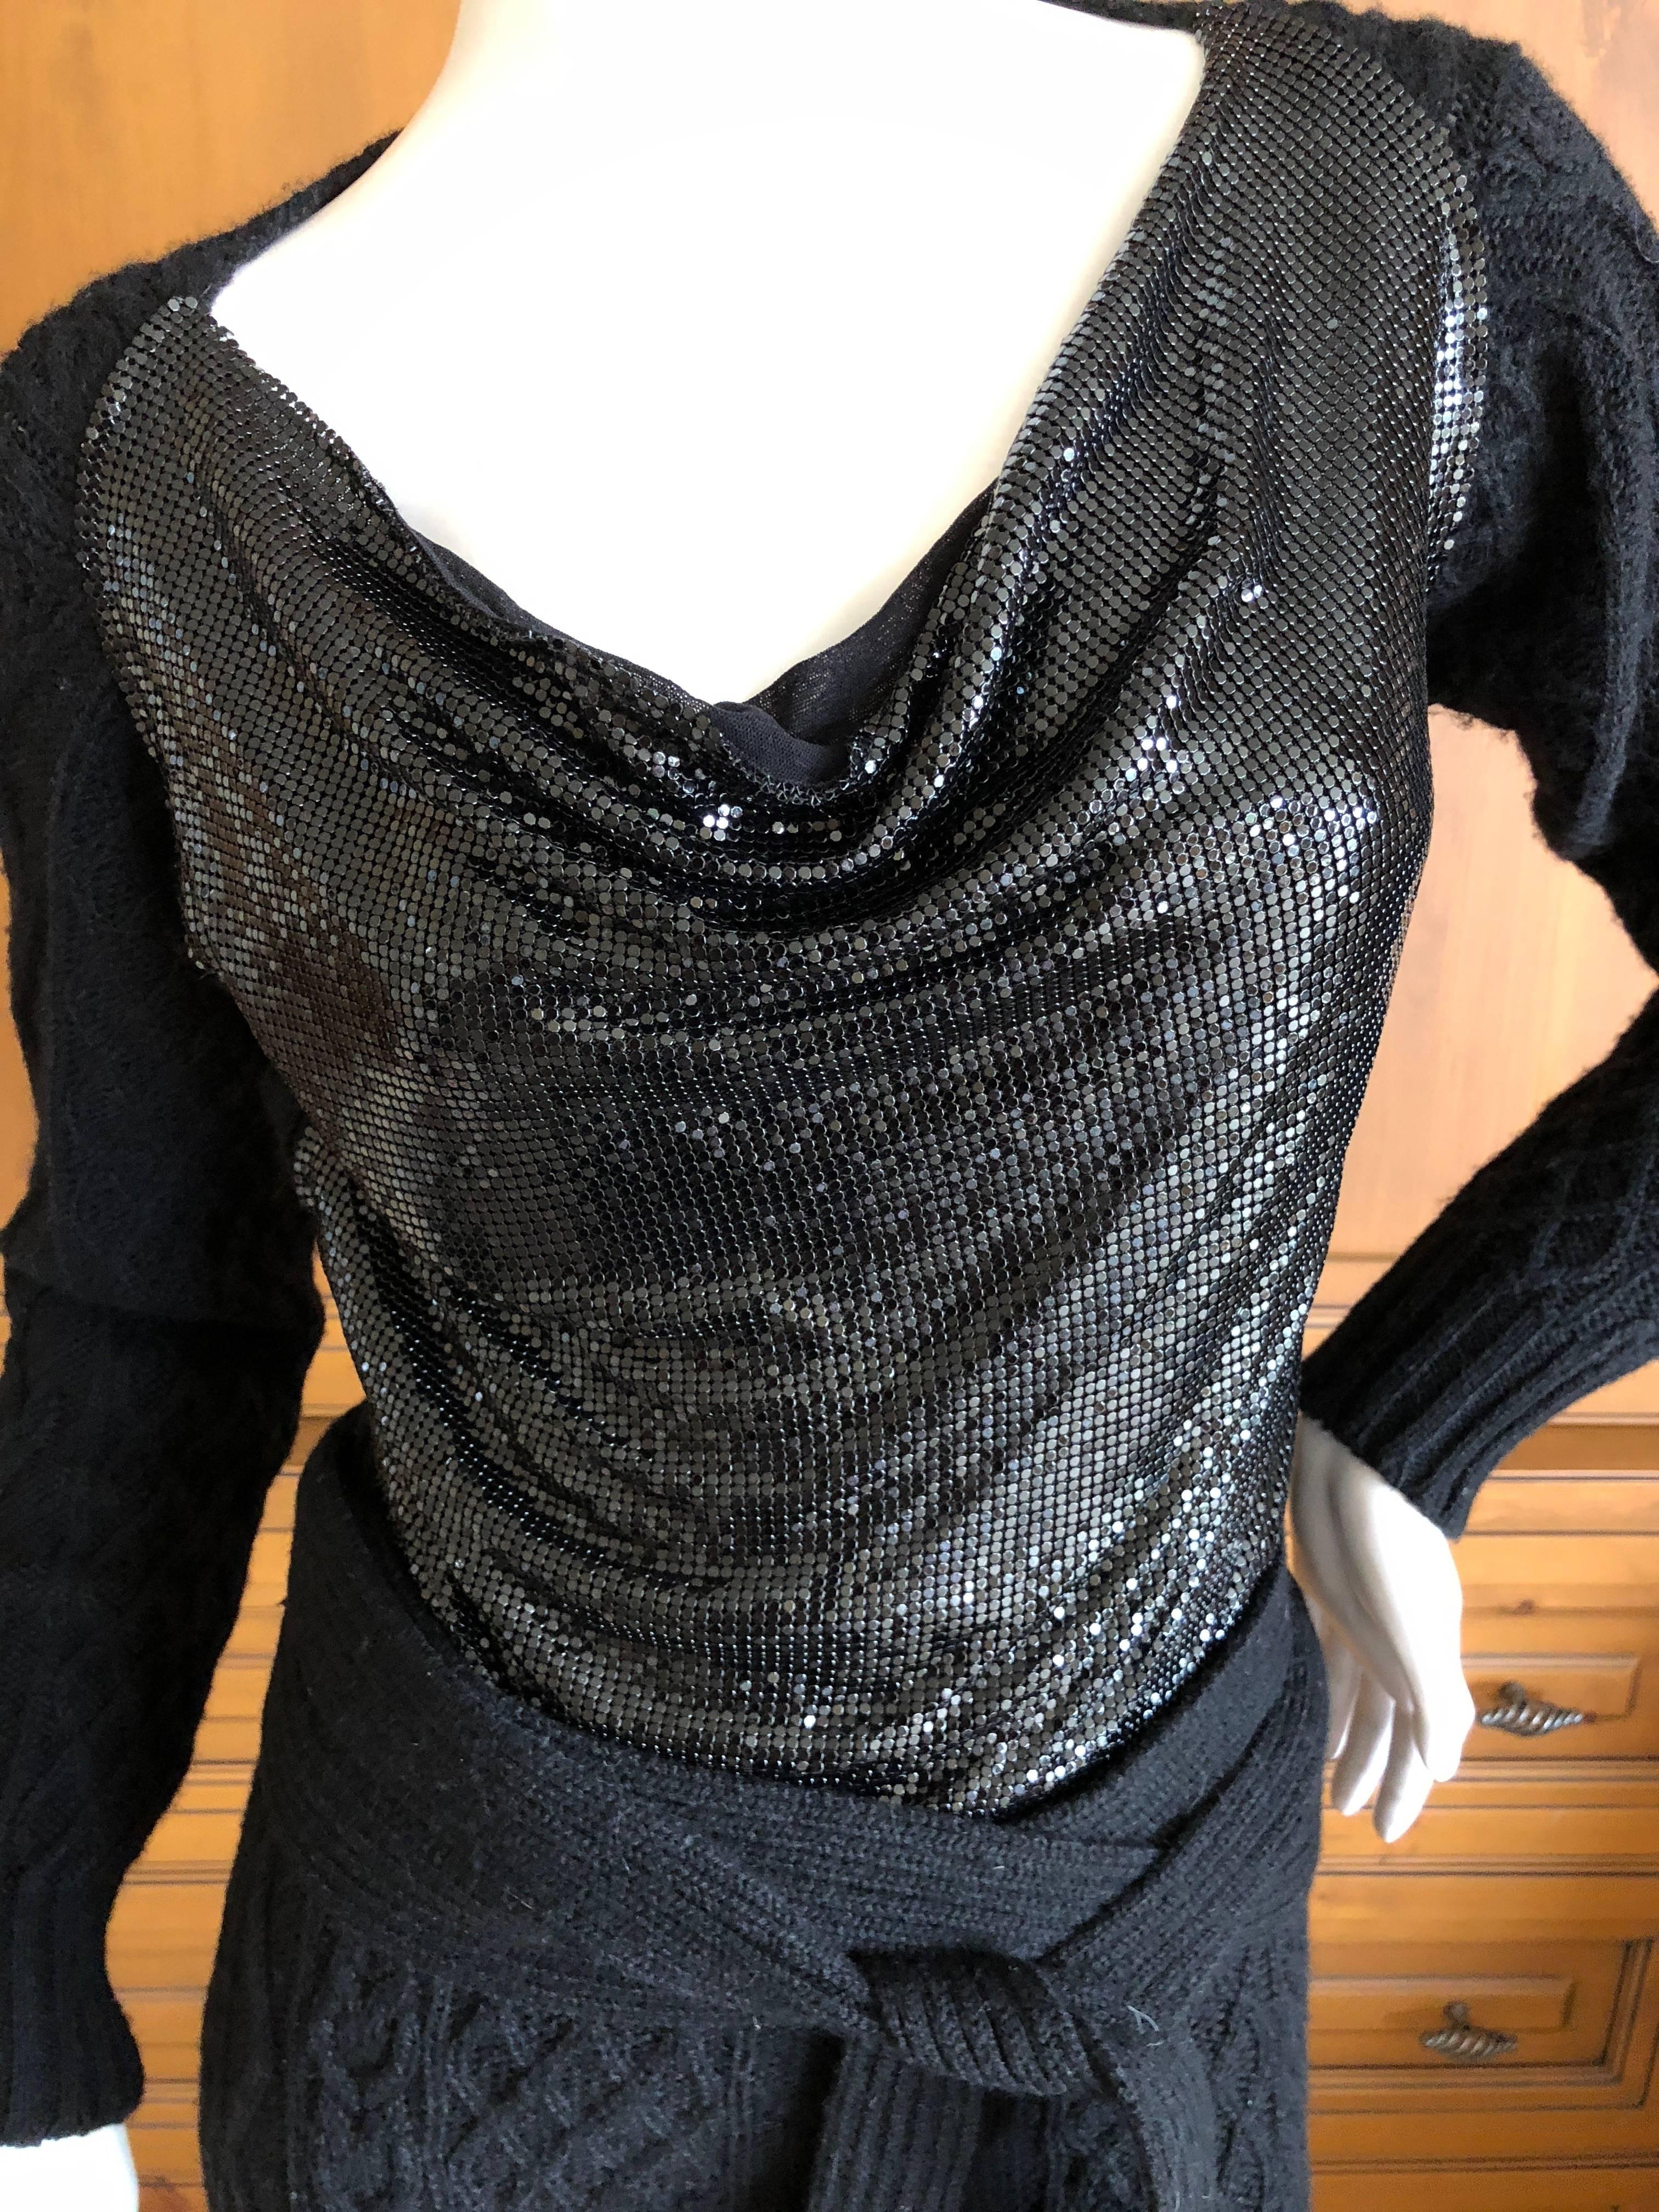 Jean Paul Gaultier Angora Blend Cable Knit Dress with Draped Metal Mesh Bodice  In Excellent Condition For Sale In Cloverdale, CA